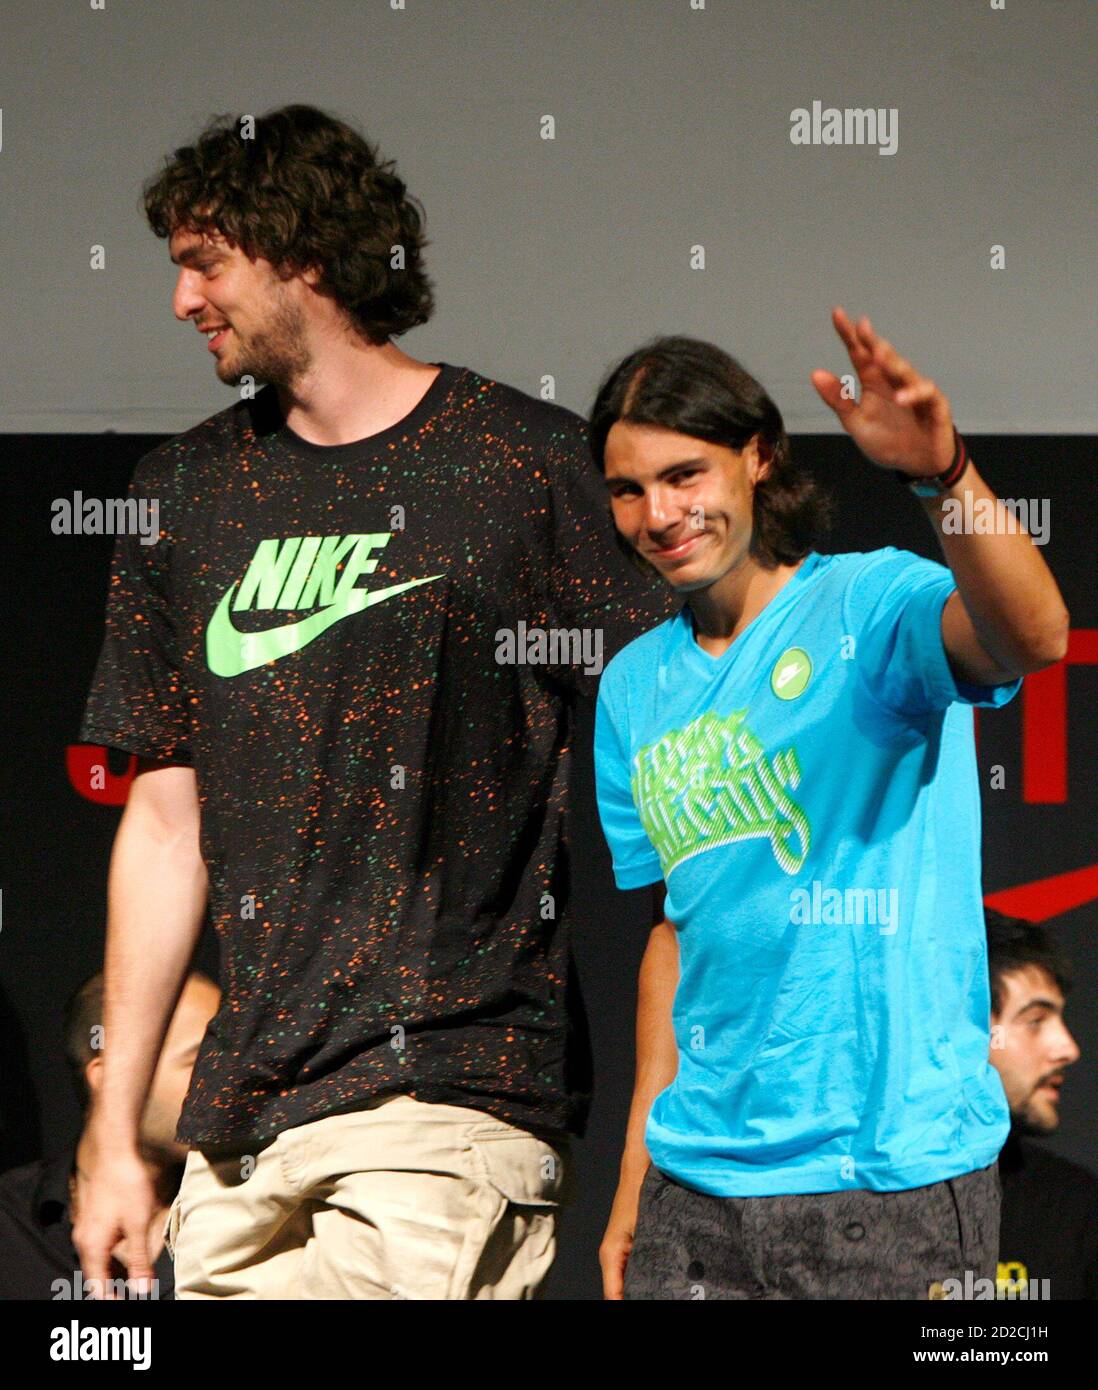 Spanish tennis player Rafael Nadal (R) and basketball player Pau Gasol  attend an merchandising event named "Momentum" in Barcelona, May 21, 2007.  REUTERS/Albert Gea (SPAIN Stock Photo - Alamy